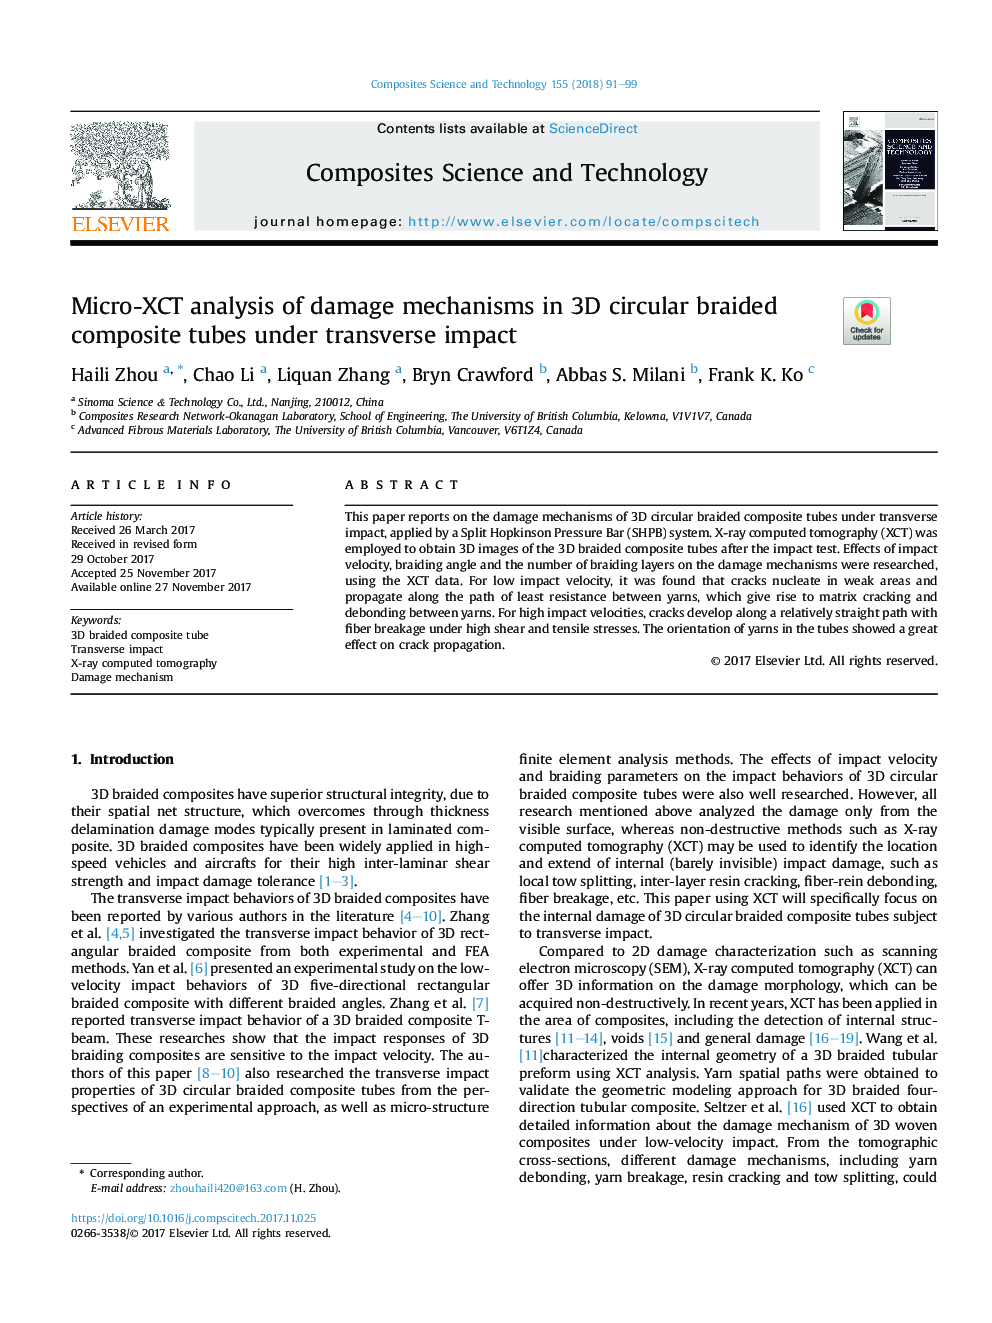 Micro-XCT analysis of damage mechanisms in 3D circular braided composite tubes under transverse impact